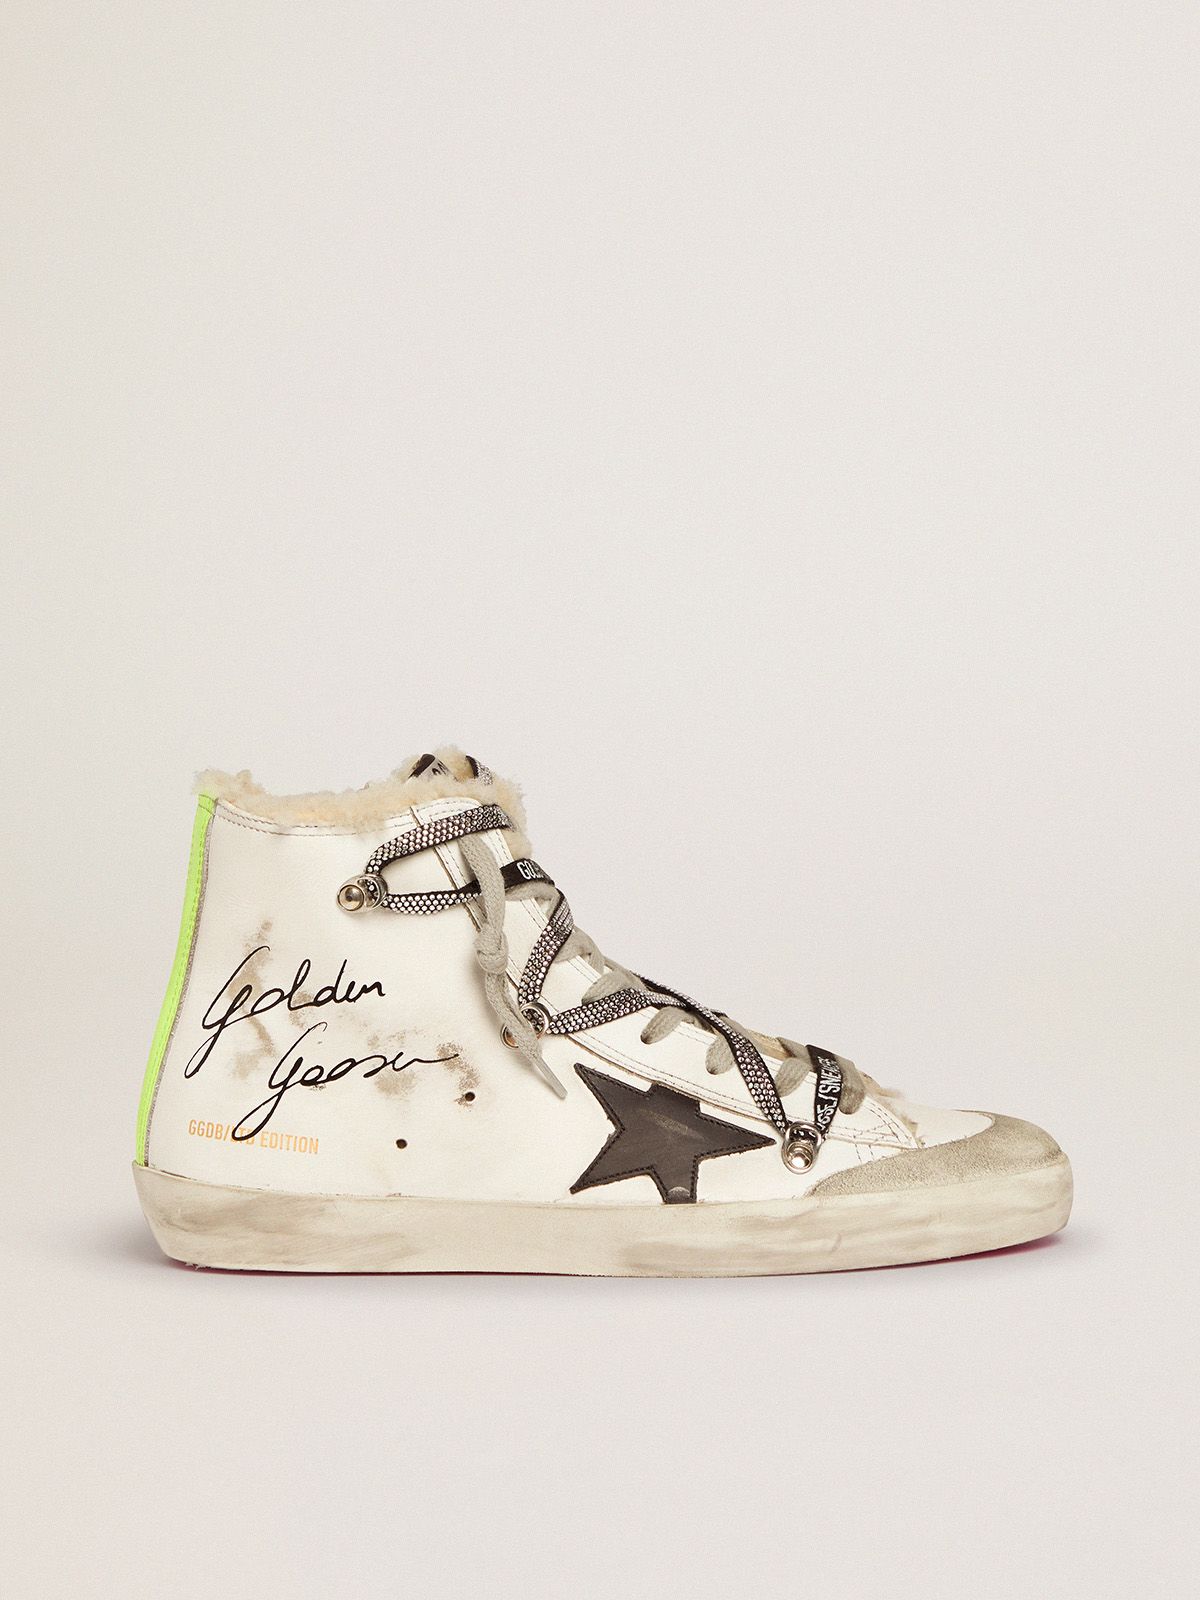 Francy Penstar LAB sneakers with shearling inserts and black star